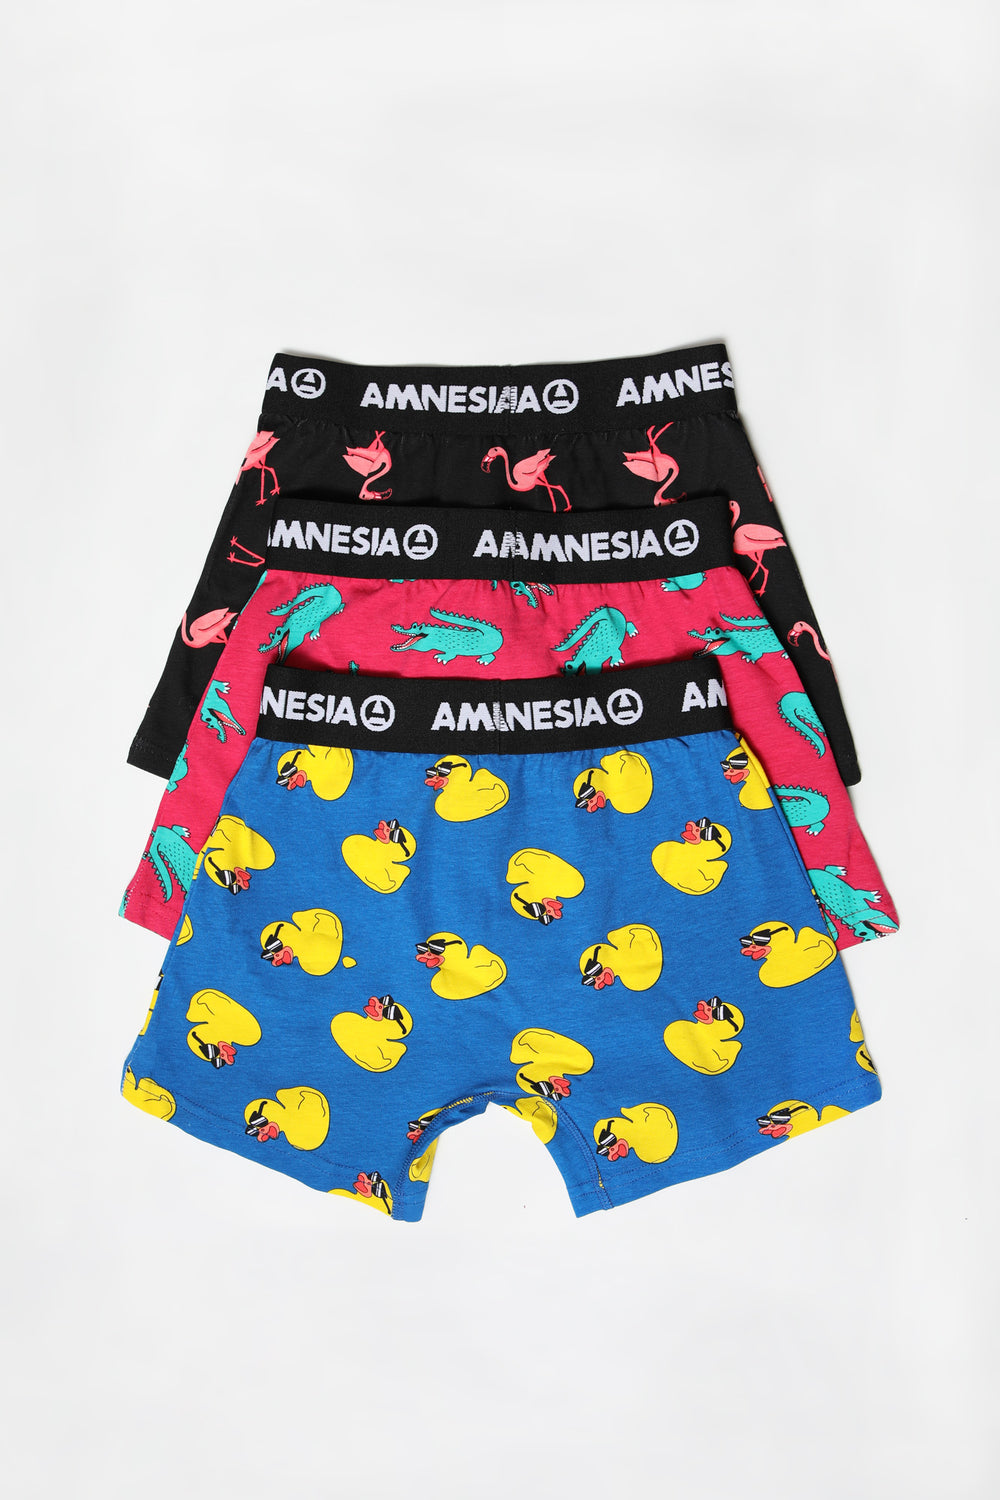 Amnesia Youth 3-Pack Animal Print Boxer Briefs Amnesia Youth 3-Pack Animal Print Boxer Briefs